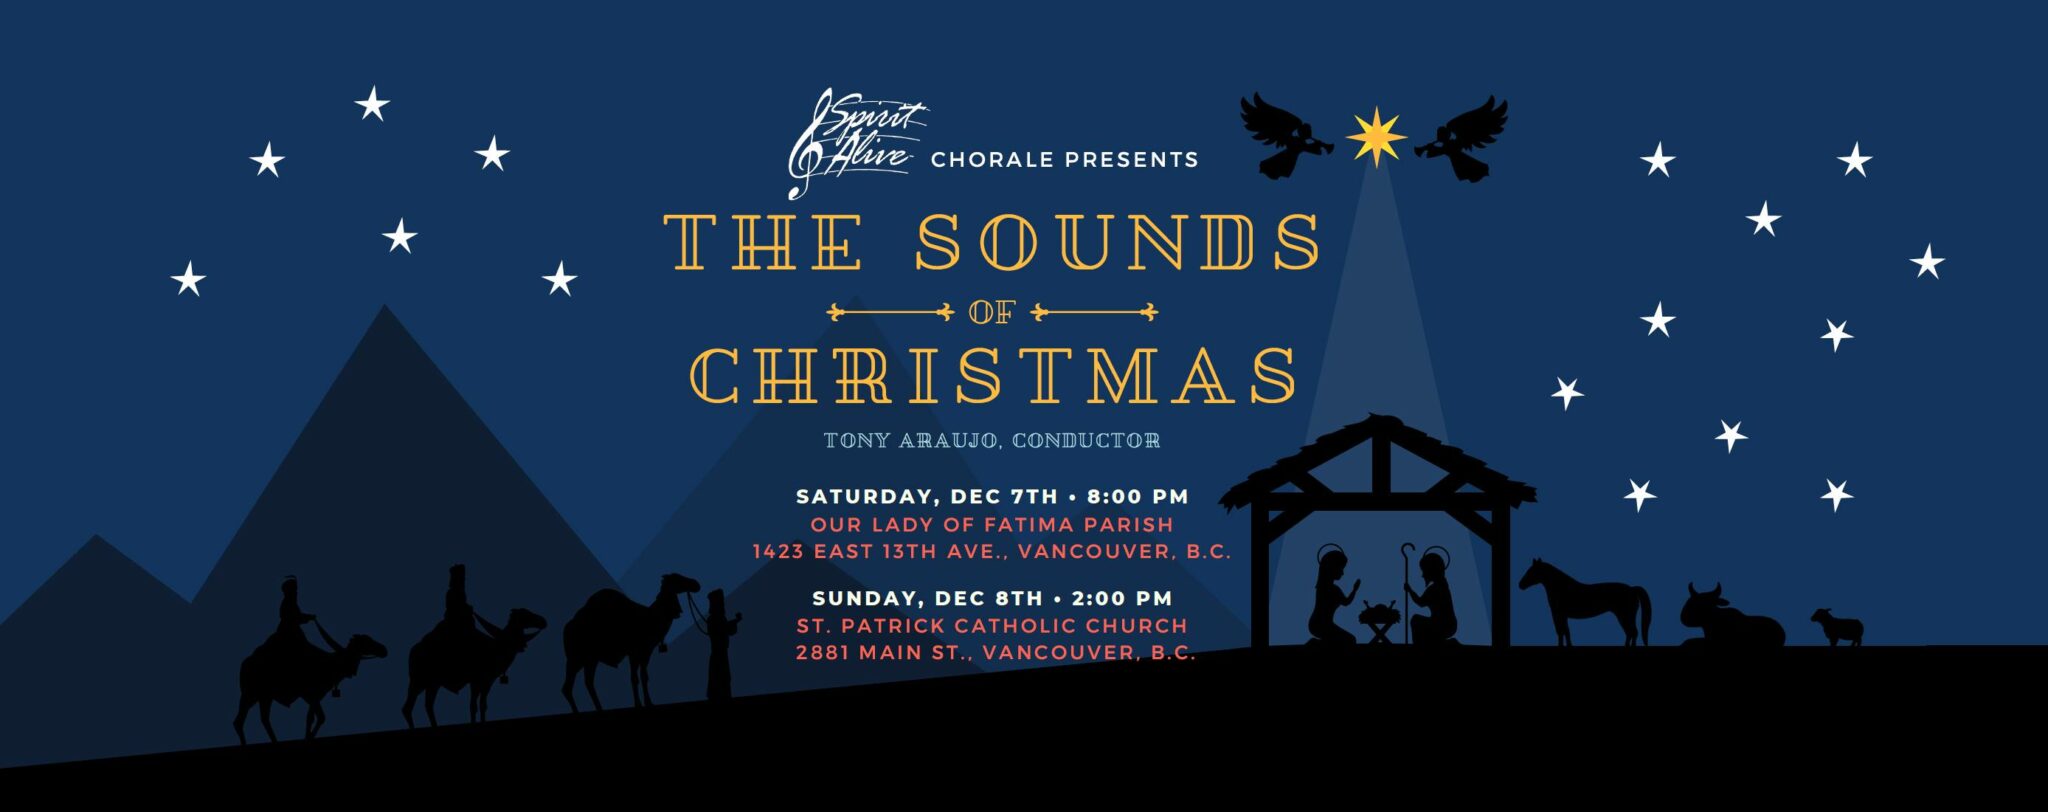 Spirit Alive Chorale, Sounds of Christmas